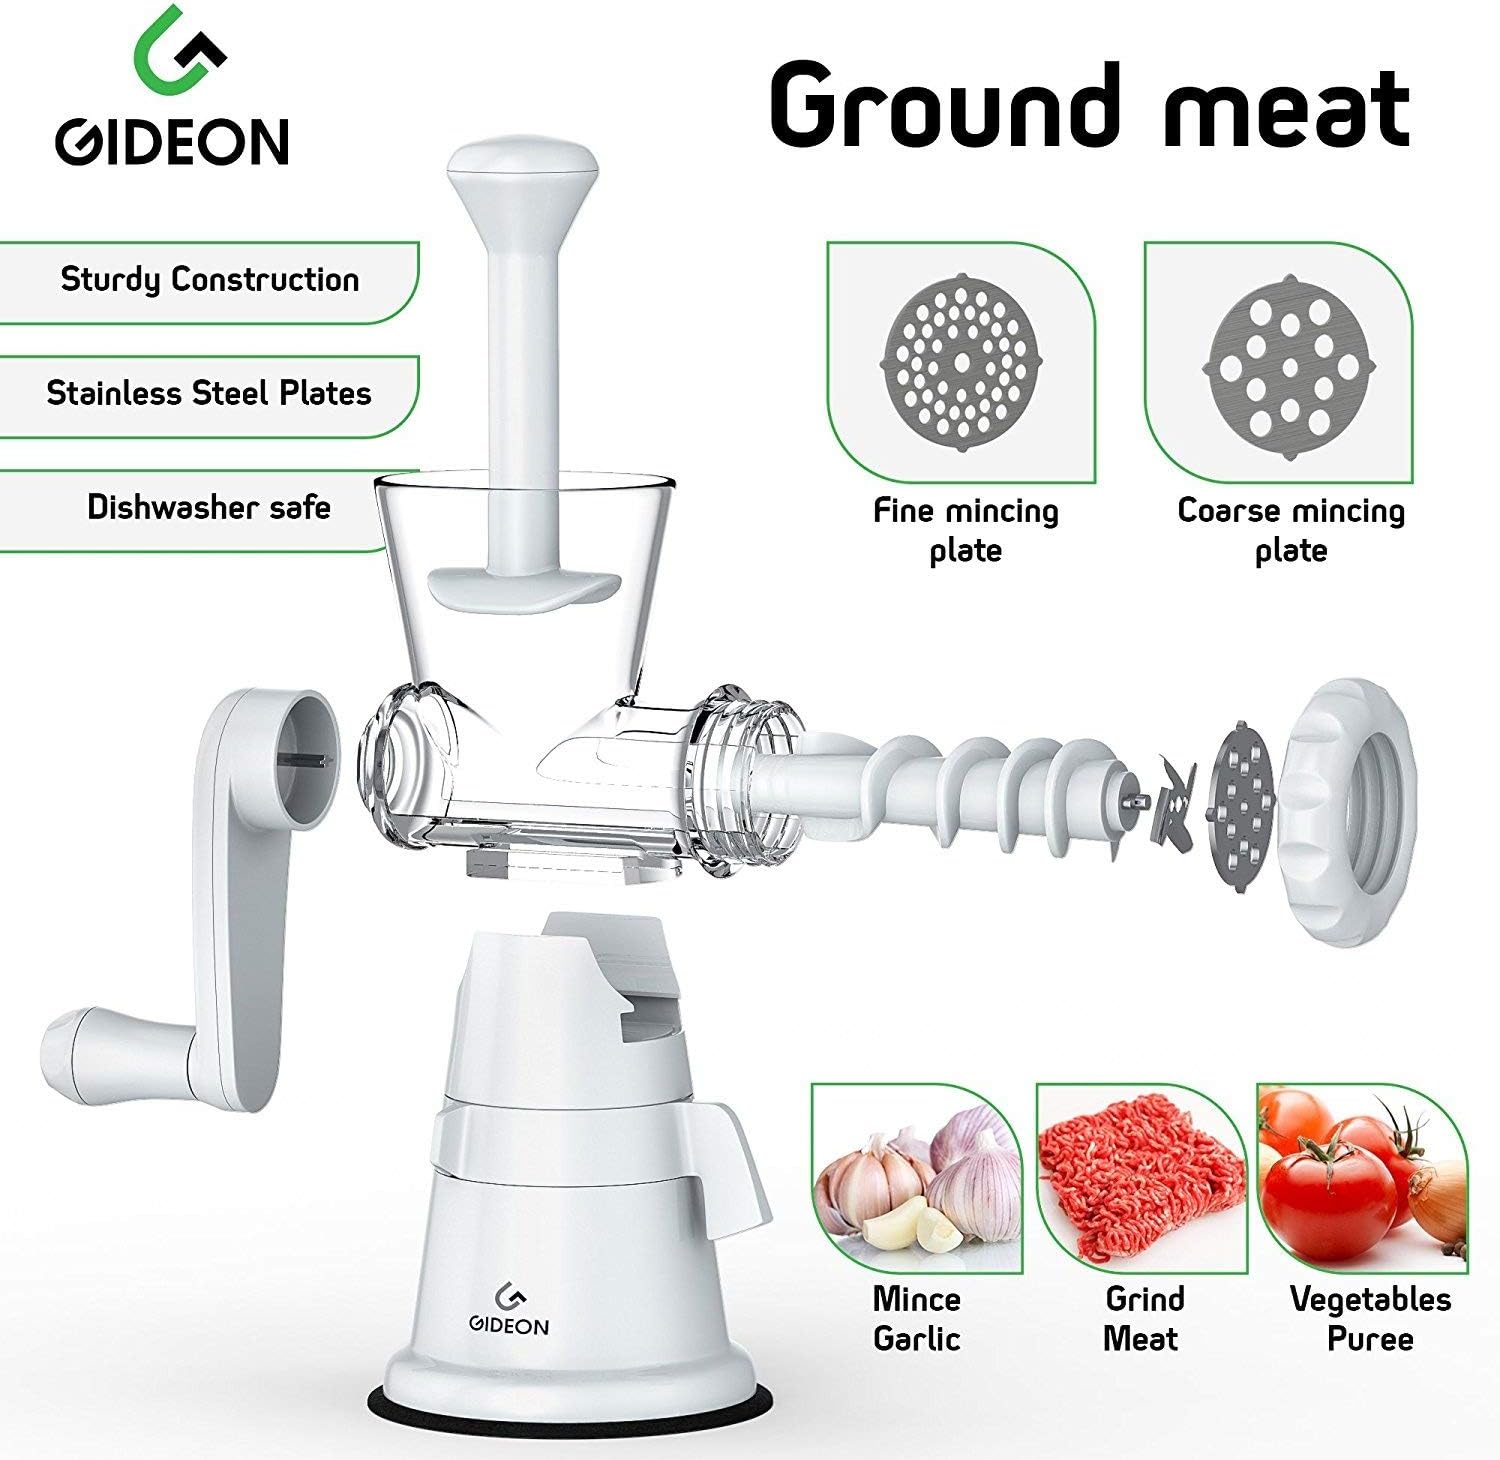 GIDEON Hand Crank Manual Meat Grinder Heavy Duty Stainless Steel Blades with Powerful Suction Base Effortlessly Grind Meat, Vegetables